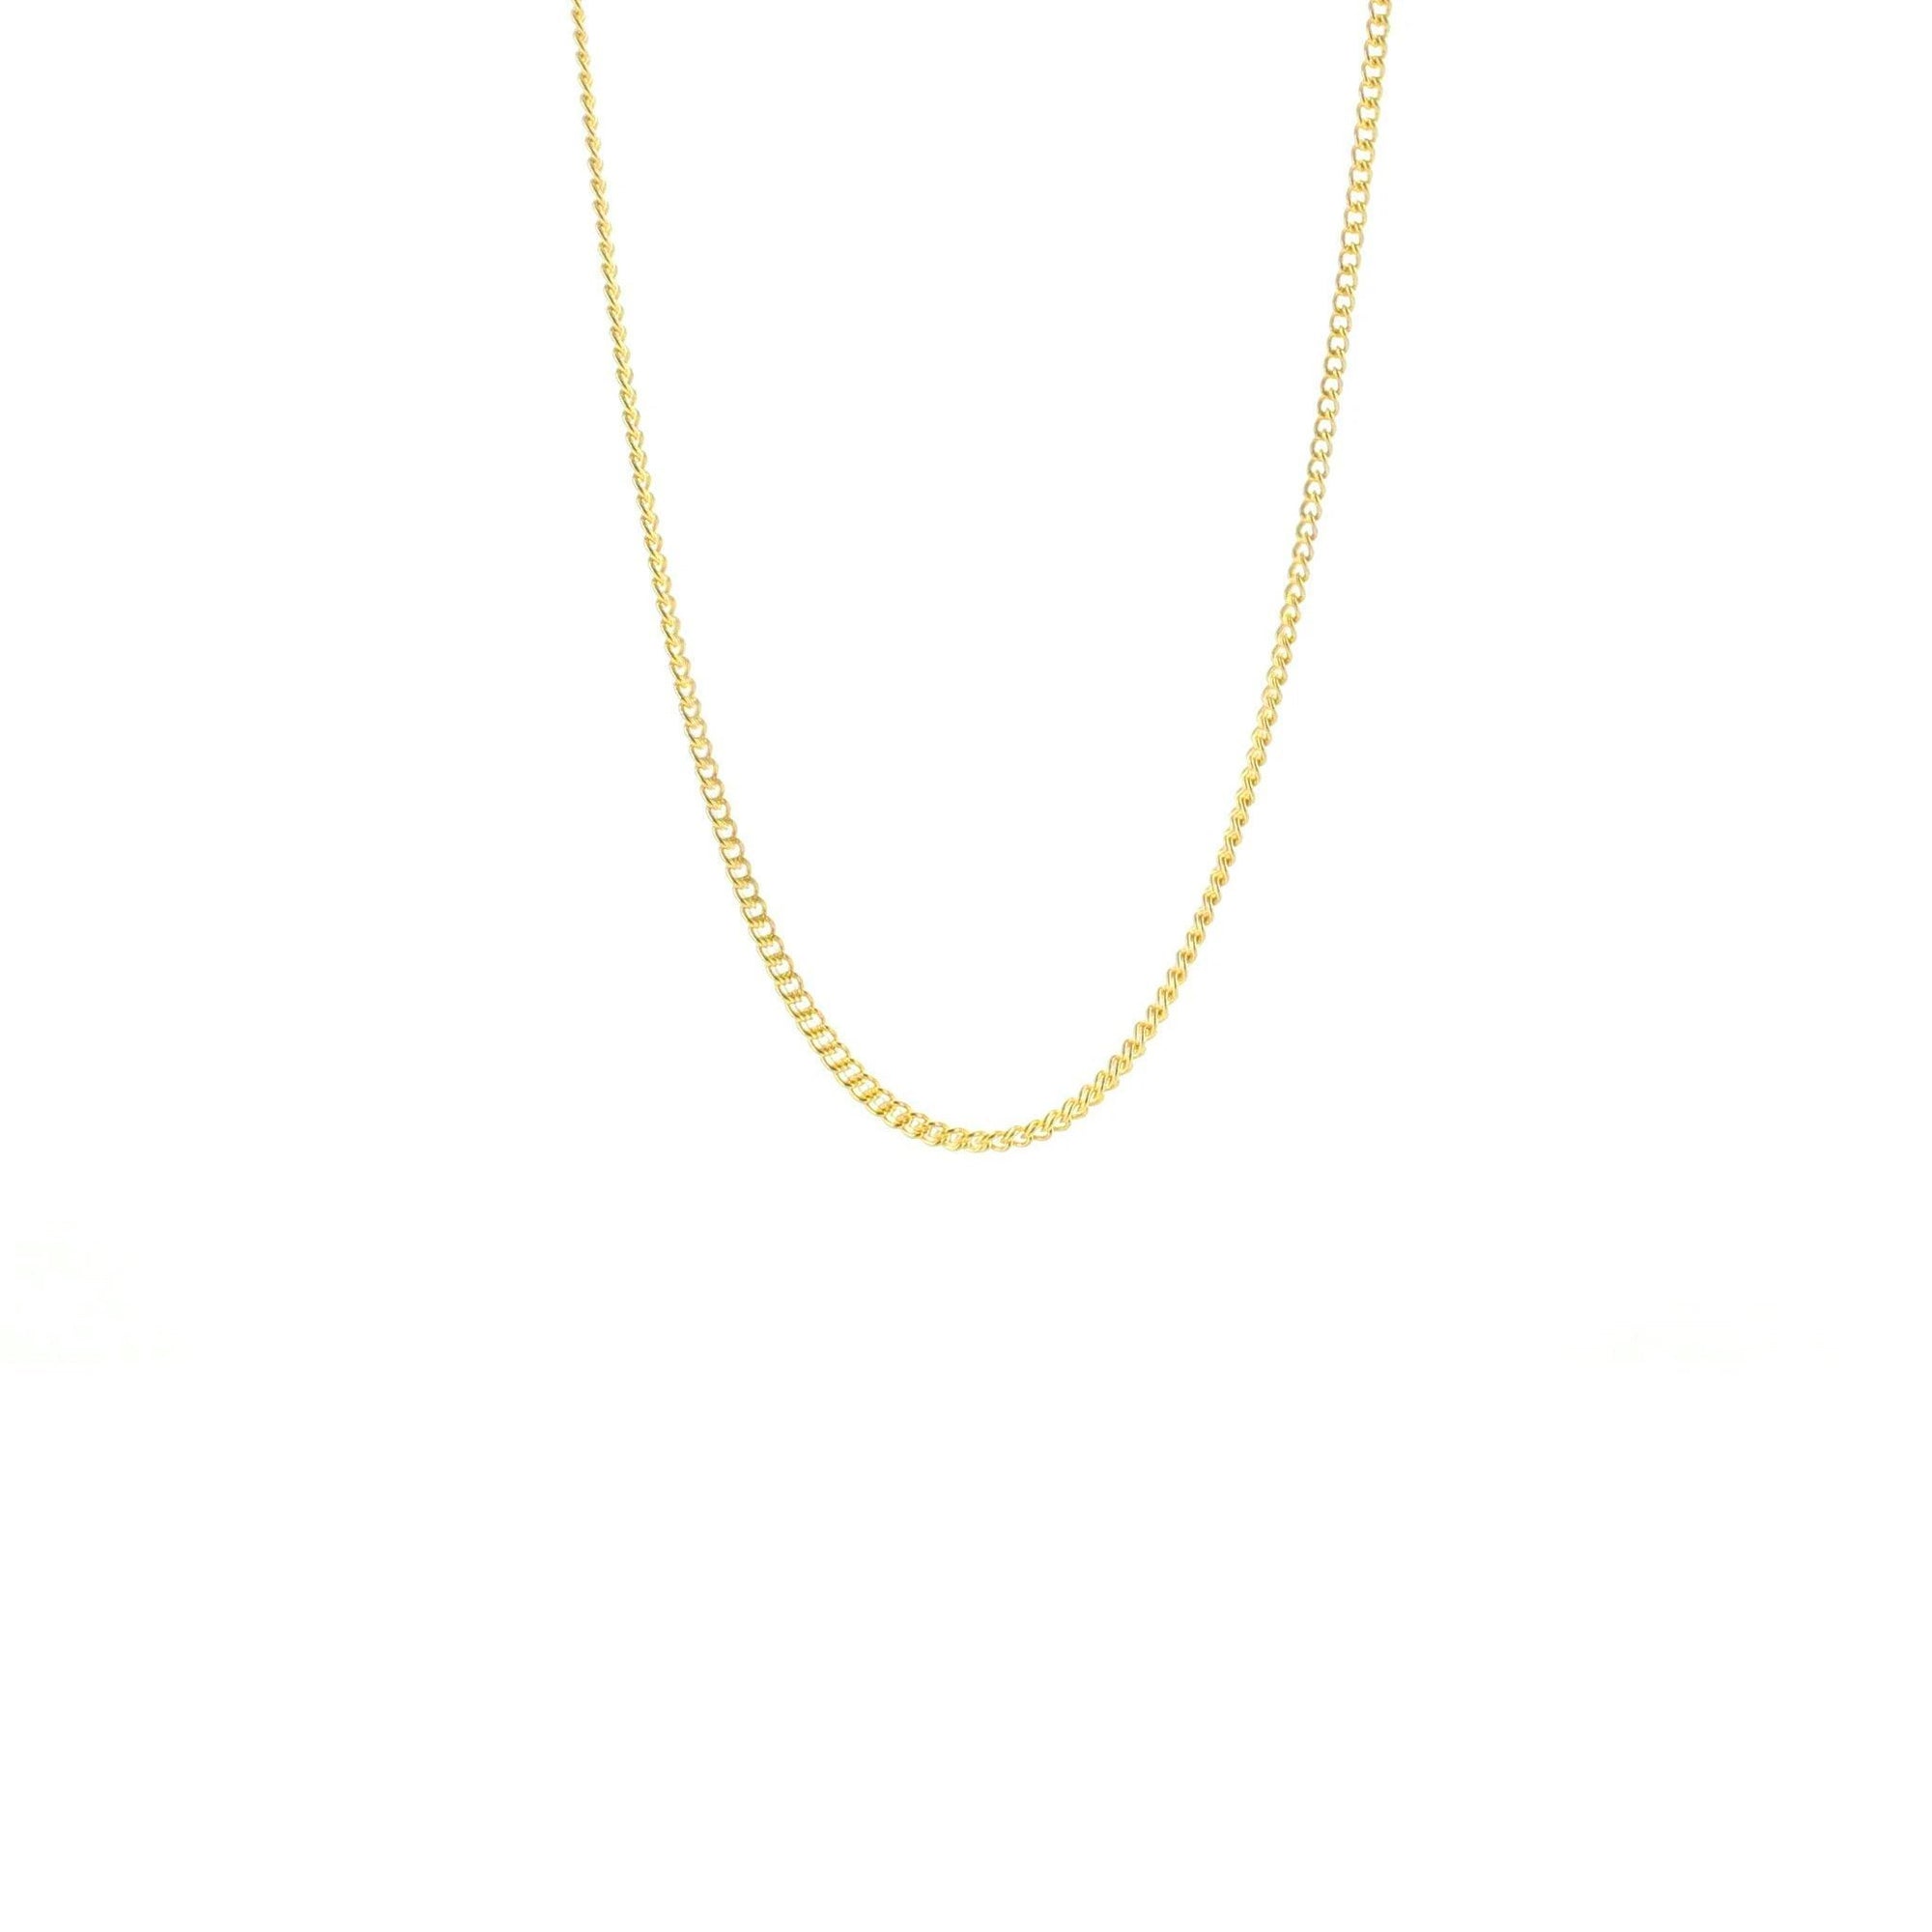 CHARMING 14-18" NECKLACE - SOLID 14K GOLD - SO PRETTY CARA COTTER